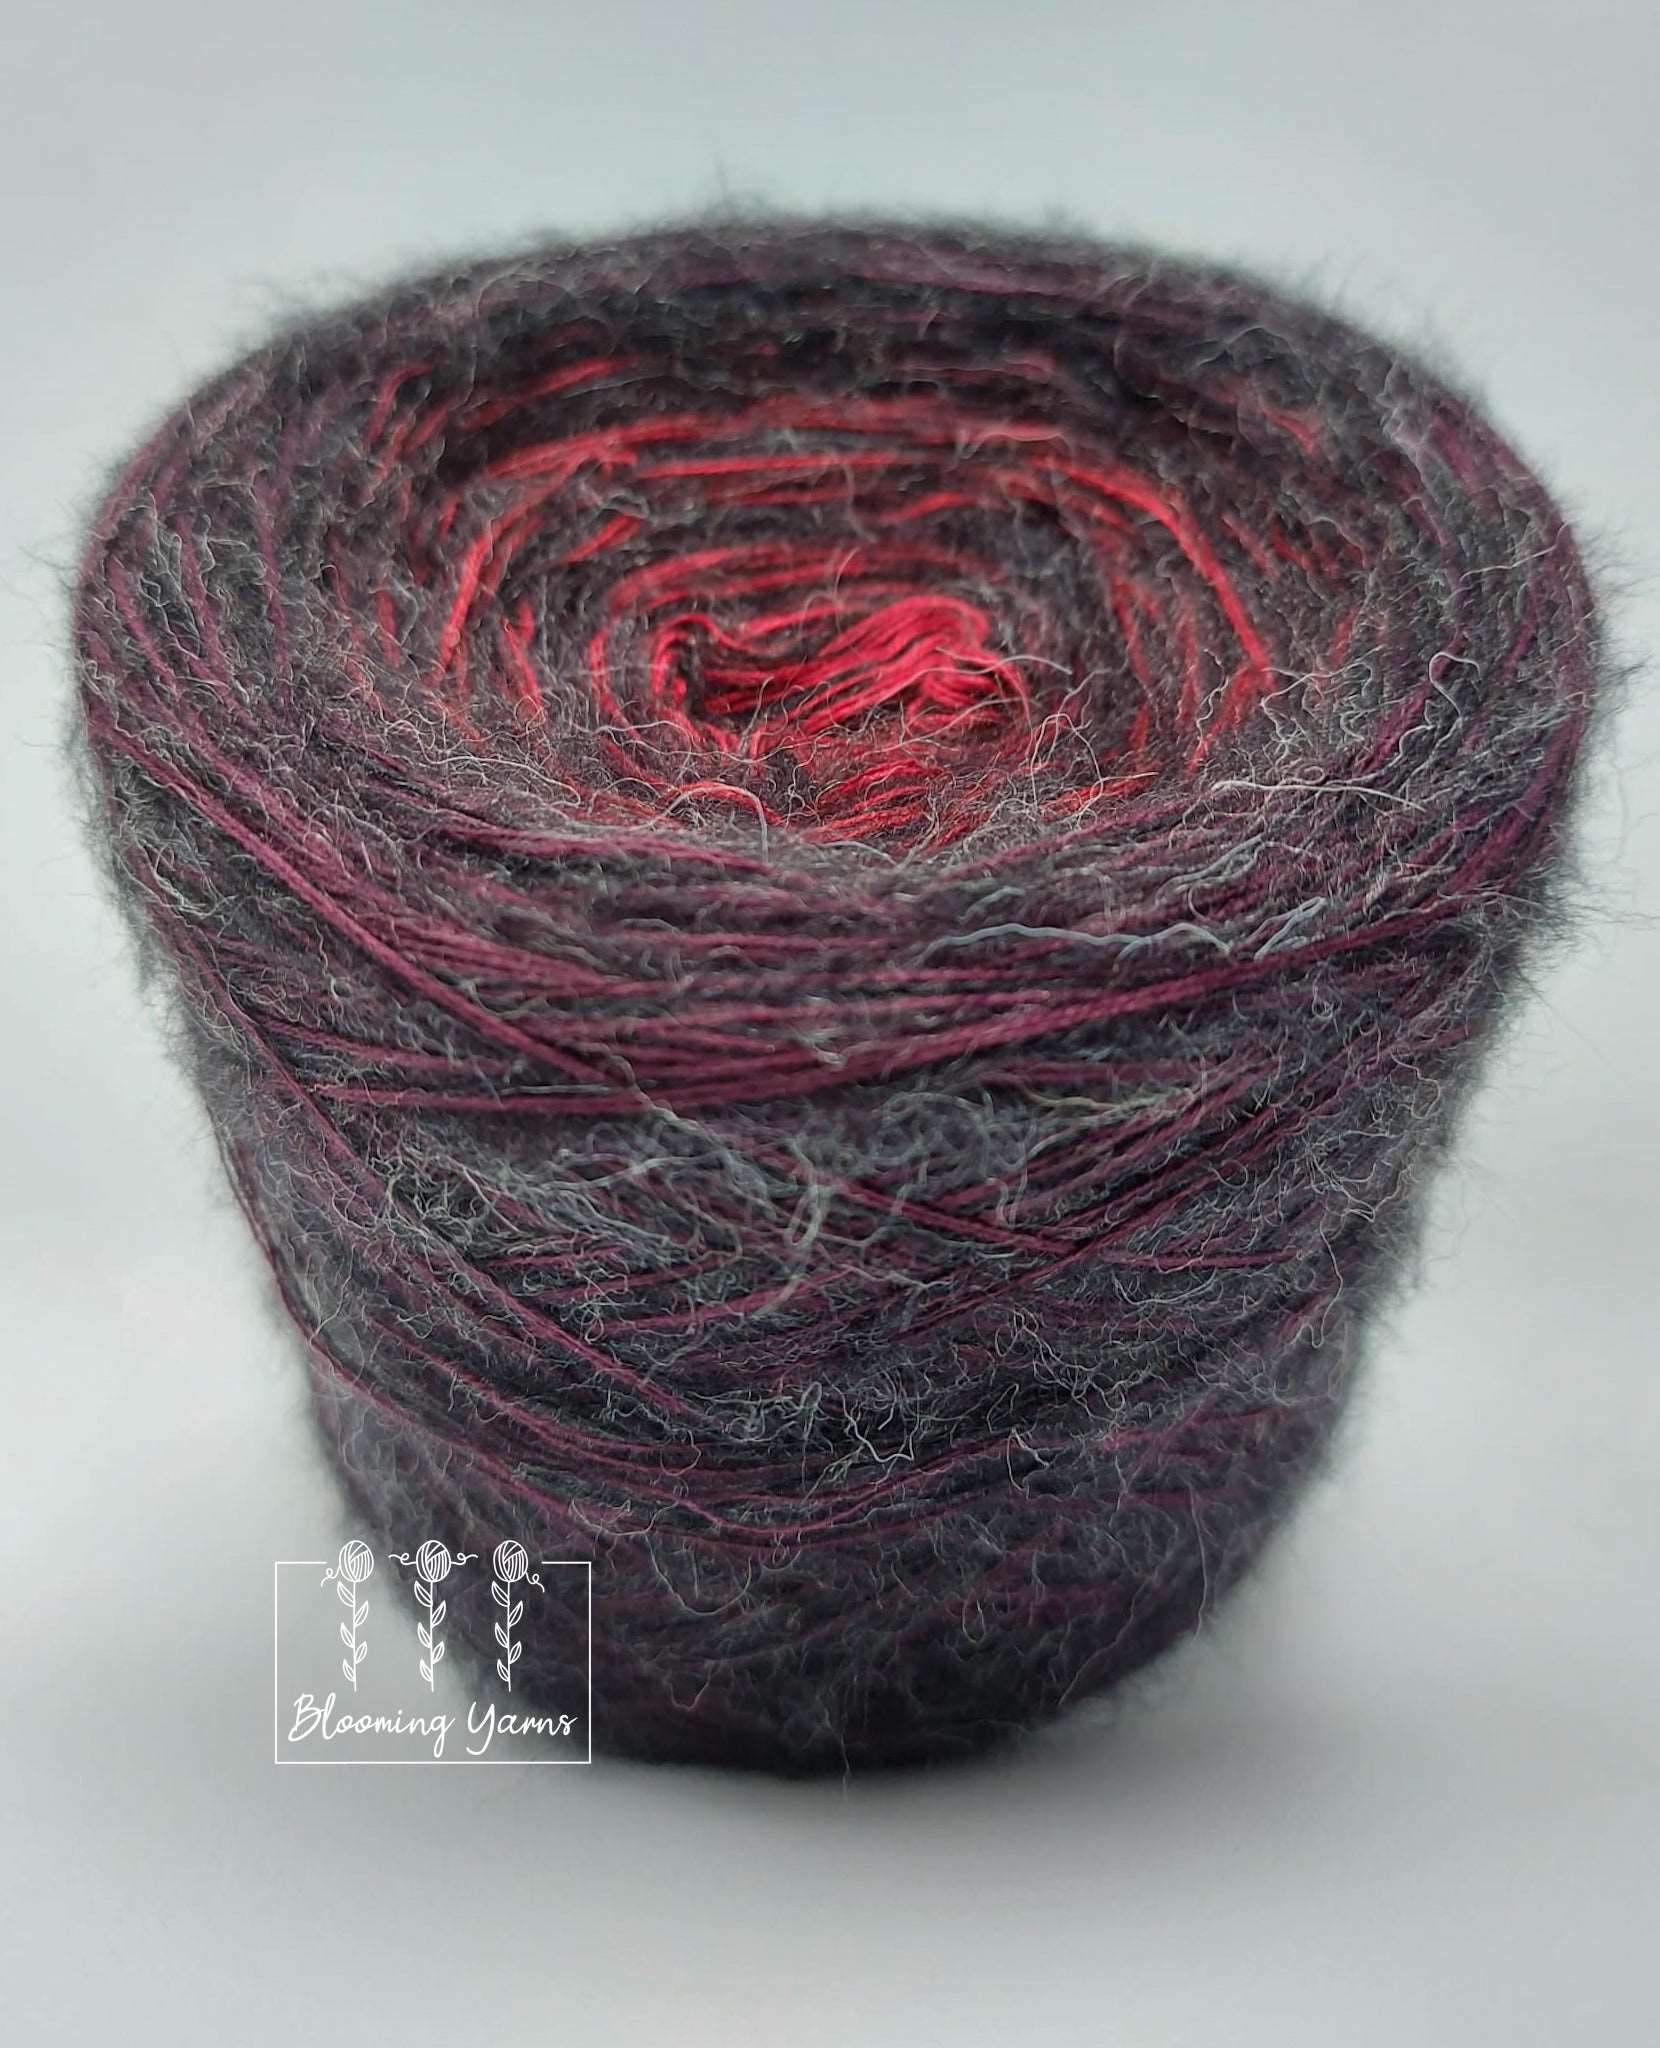 Fluffy cake FC011 , 250g, 2ply+ mohair mix , 950m